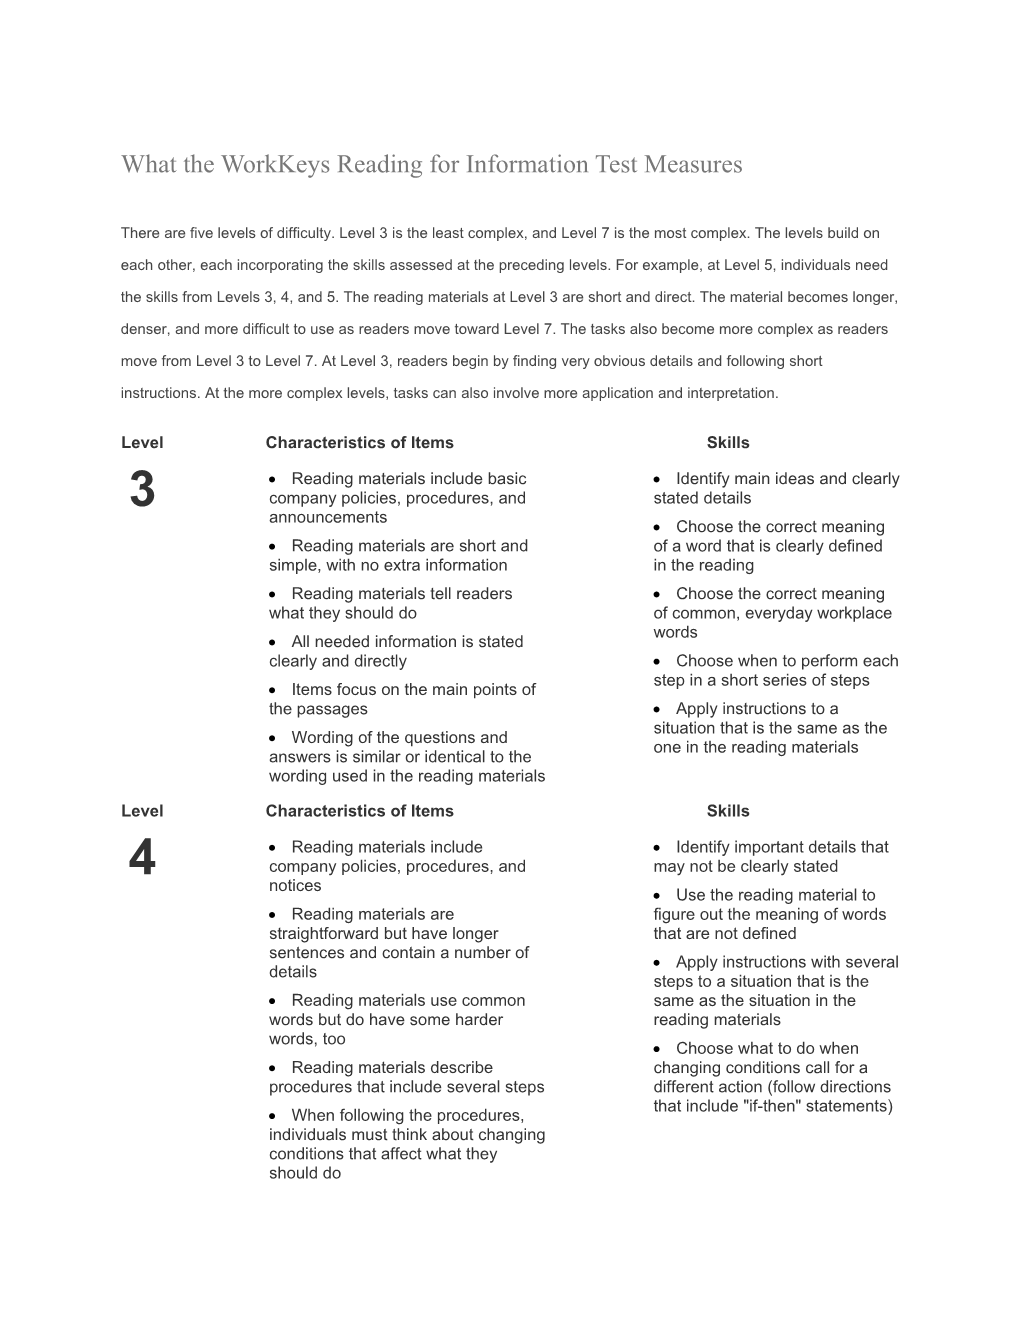 What the Workkeys Reading for Information Test Measures